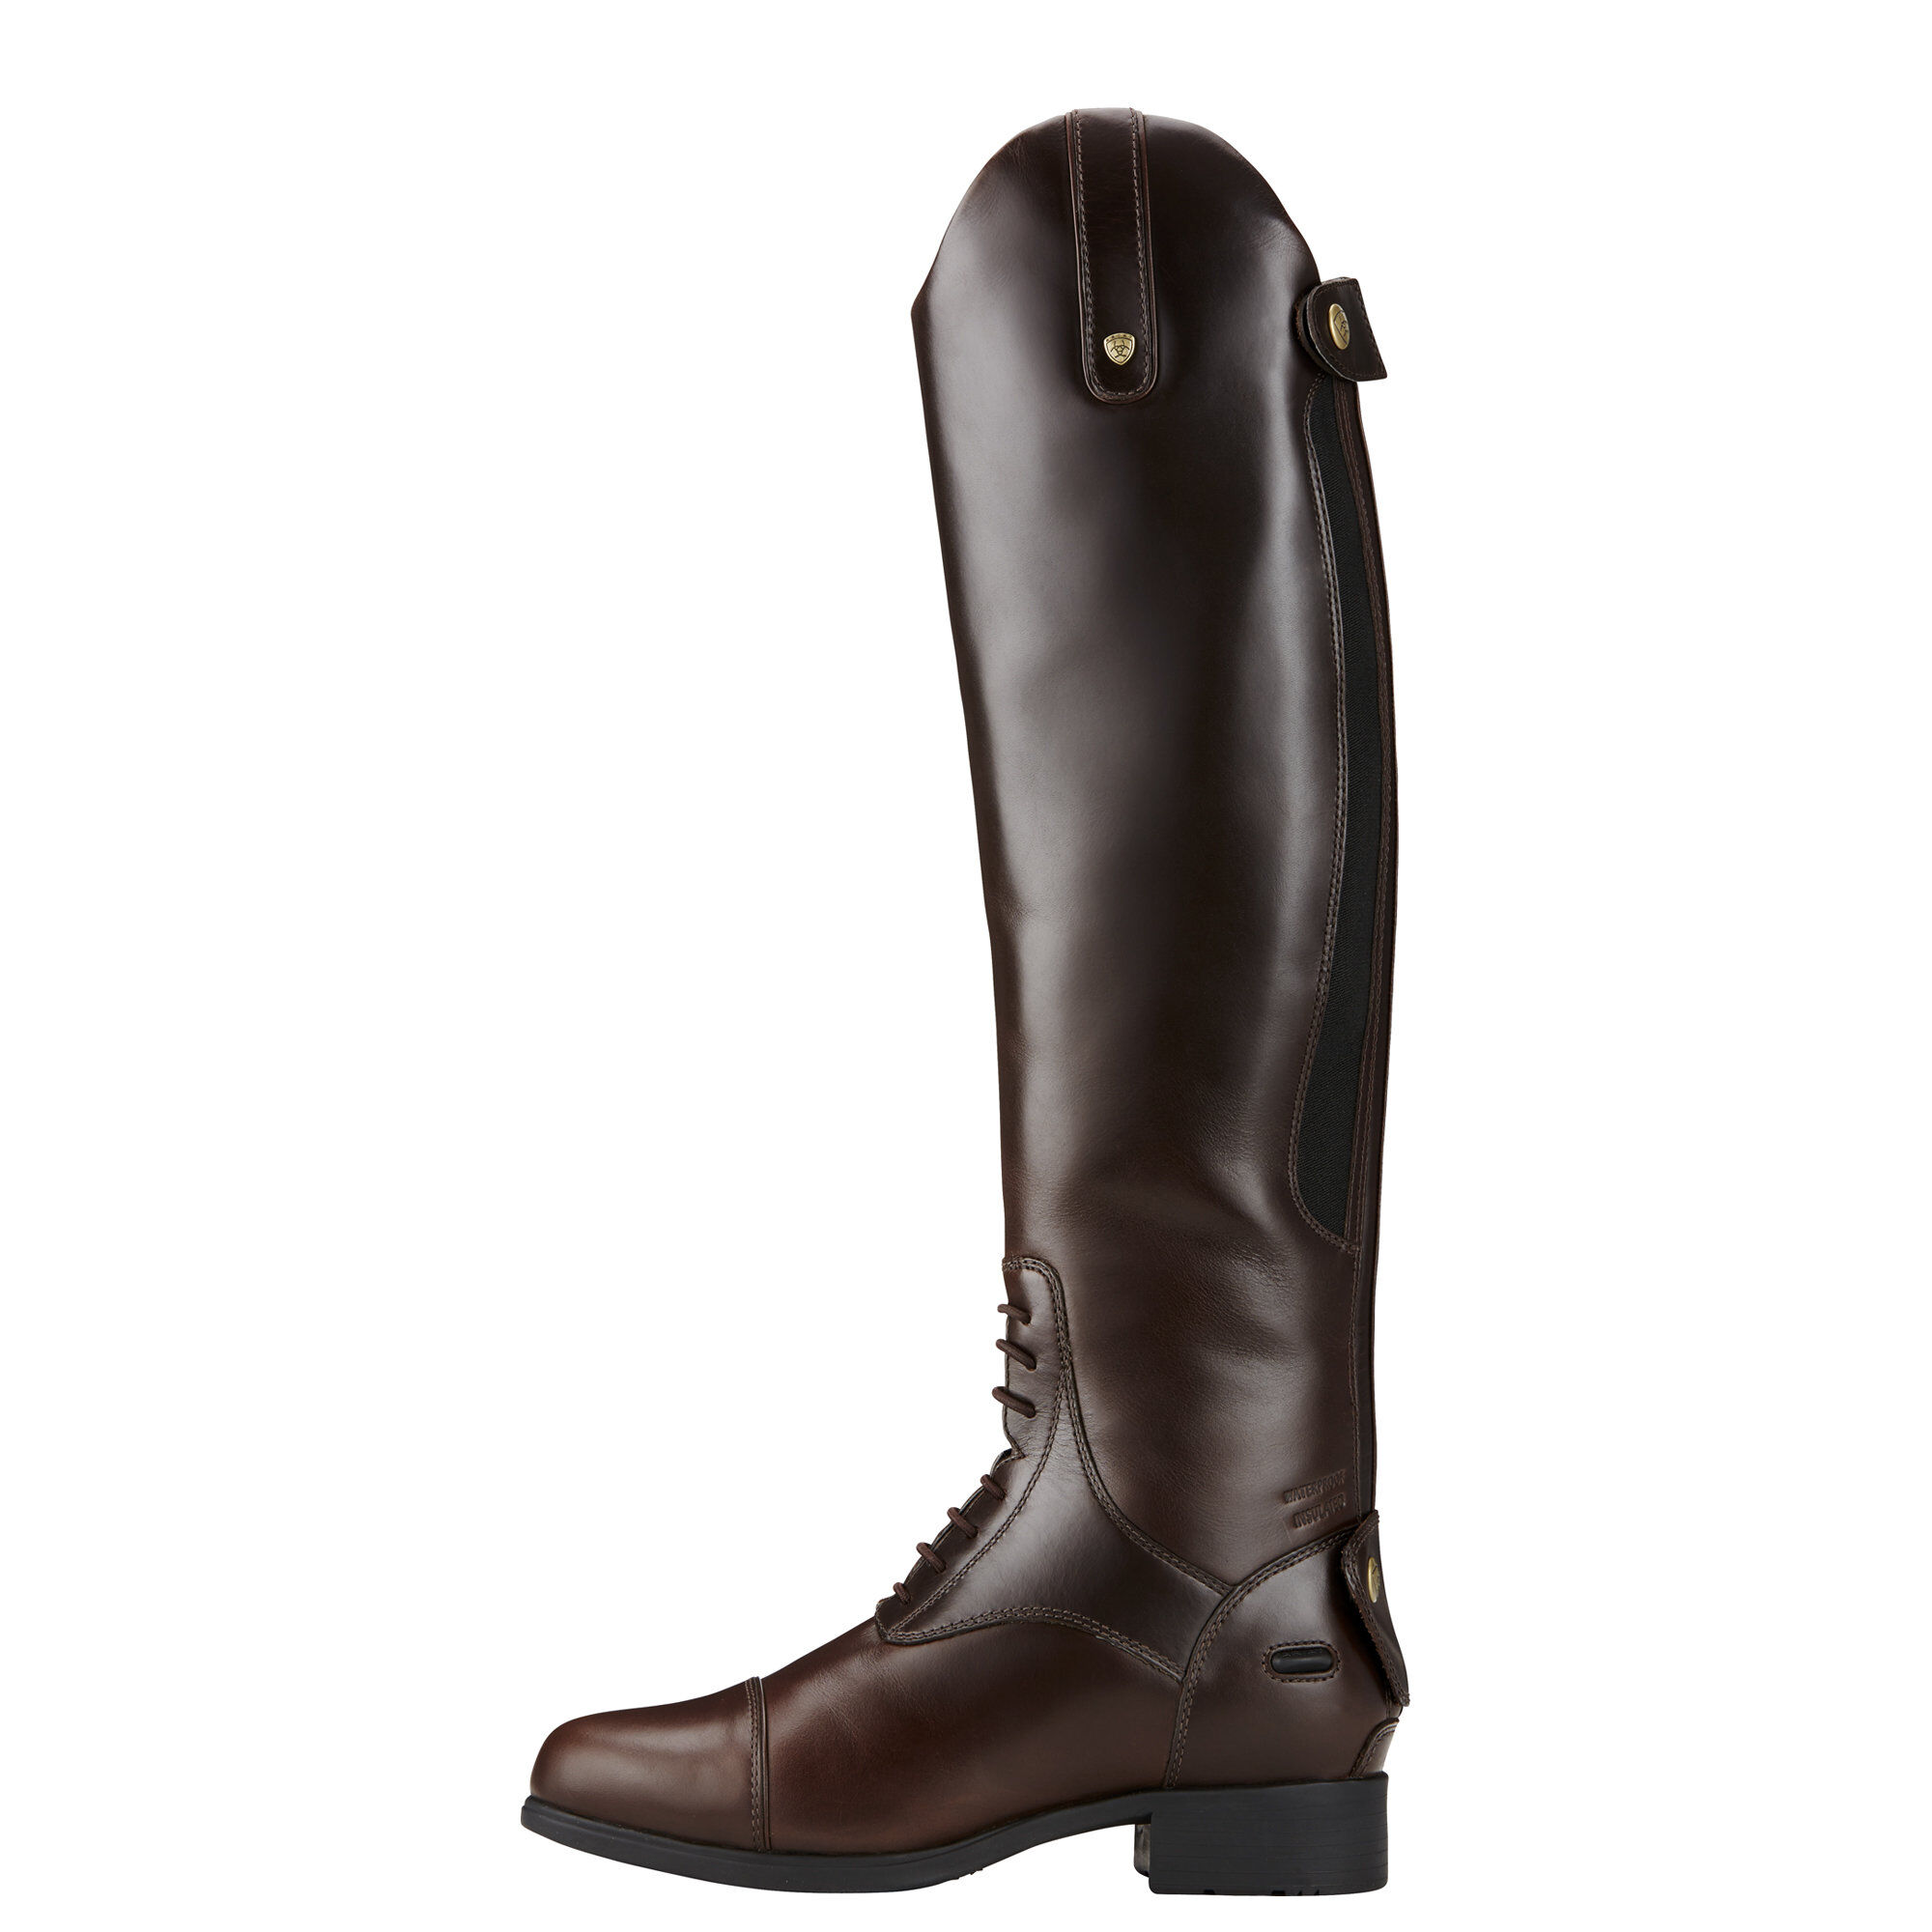 Ariat Capriole Tall riding Boot in Black